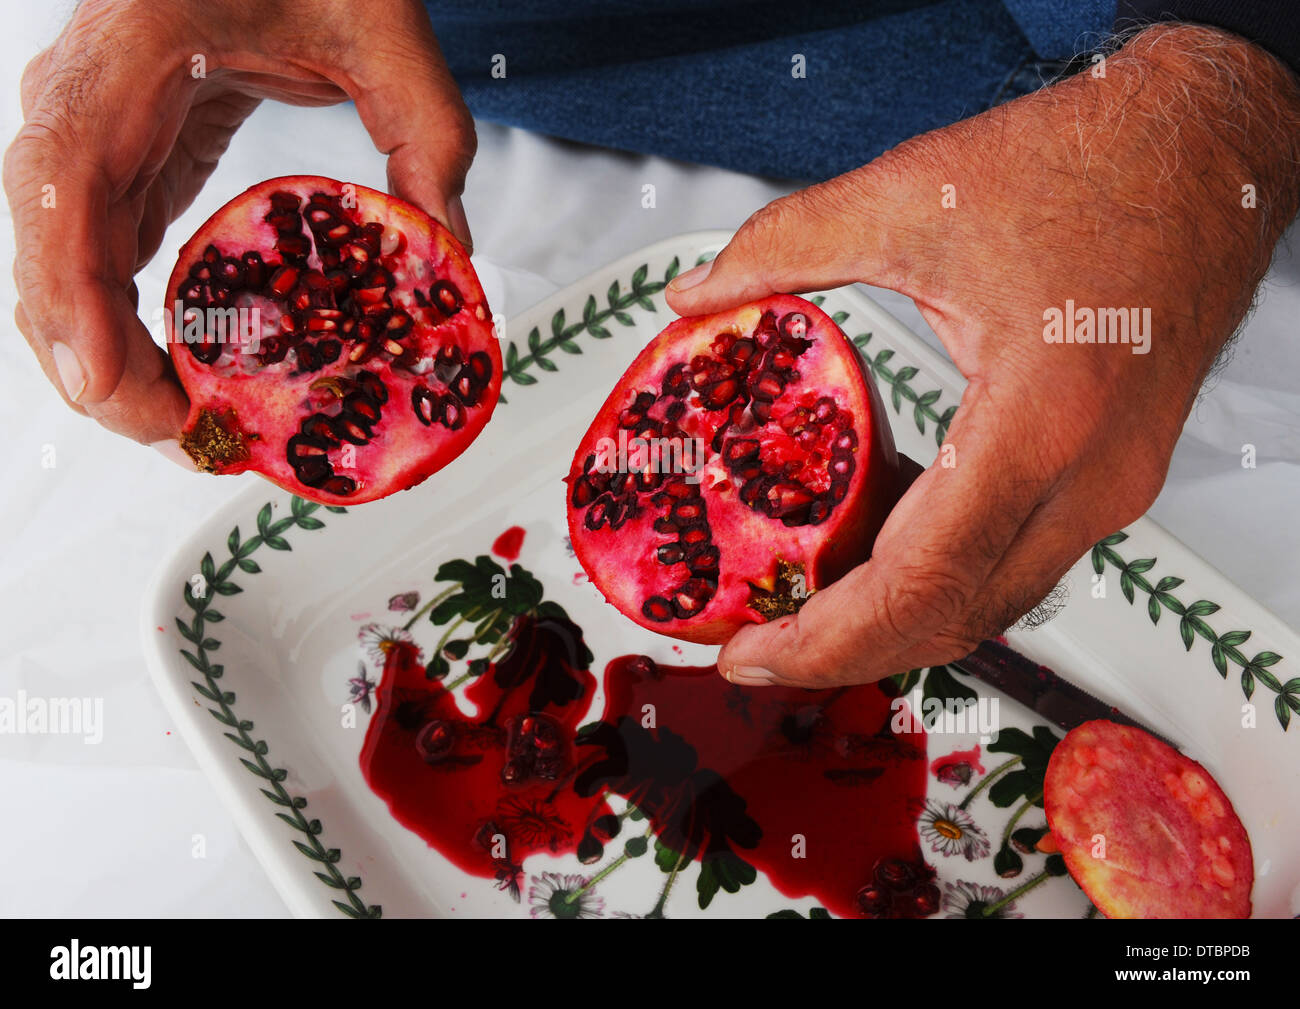 Ruby red pomegranate fruit cut in half showing rich red seeds in sections of white membrane within fruit with juice flowing out. Stock Photo